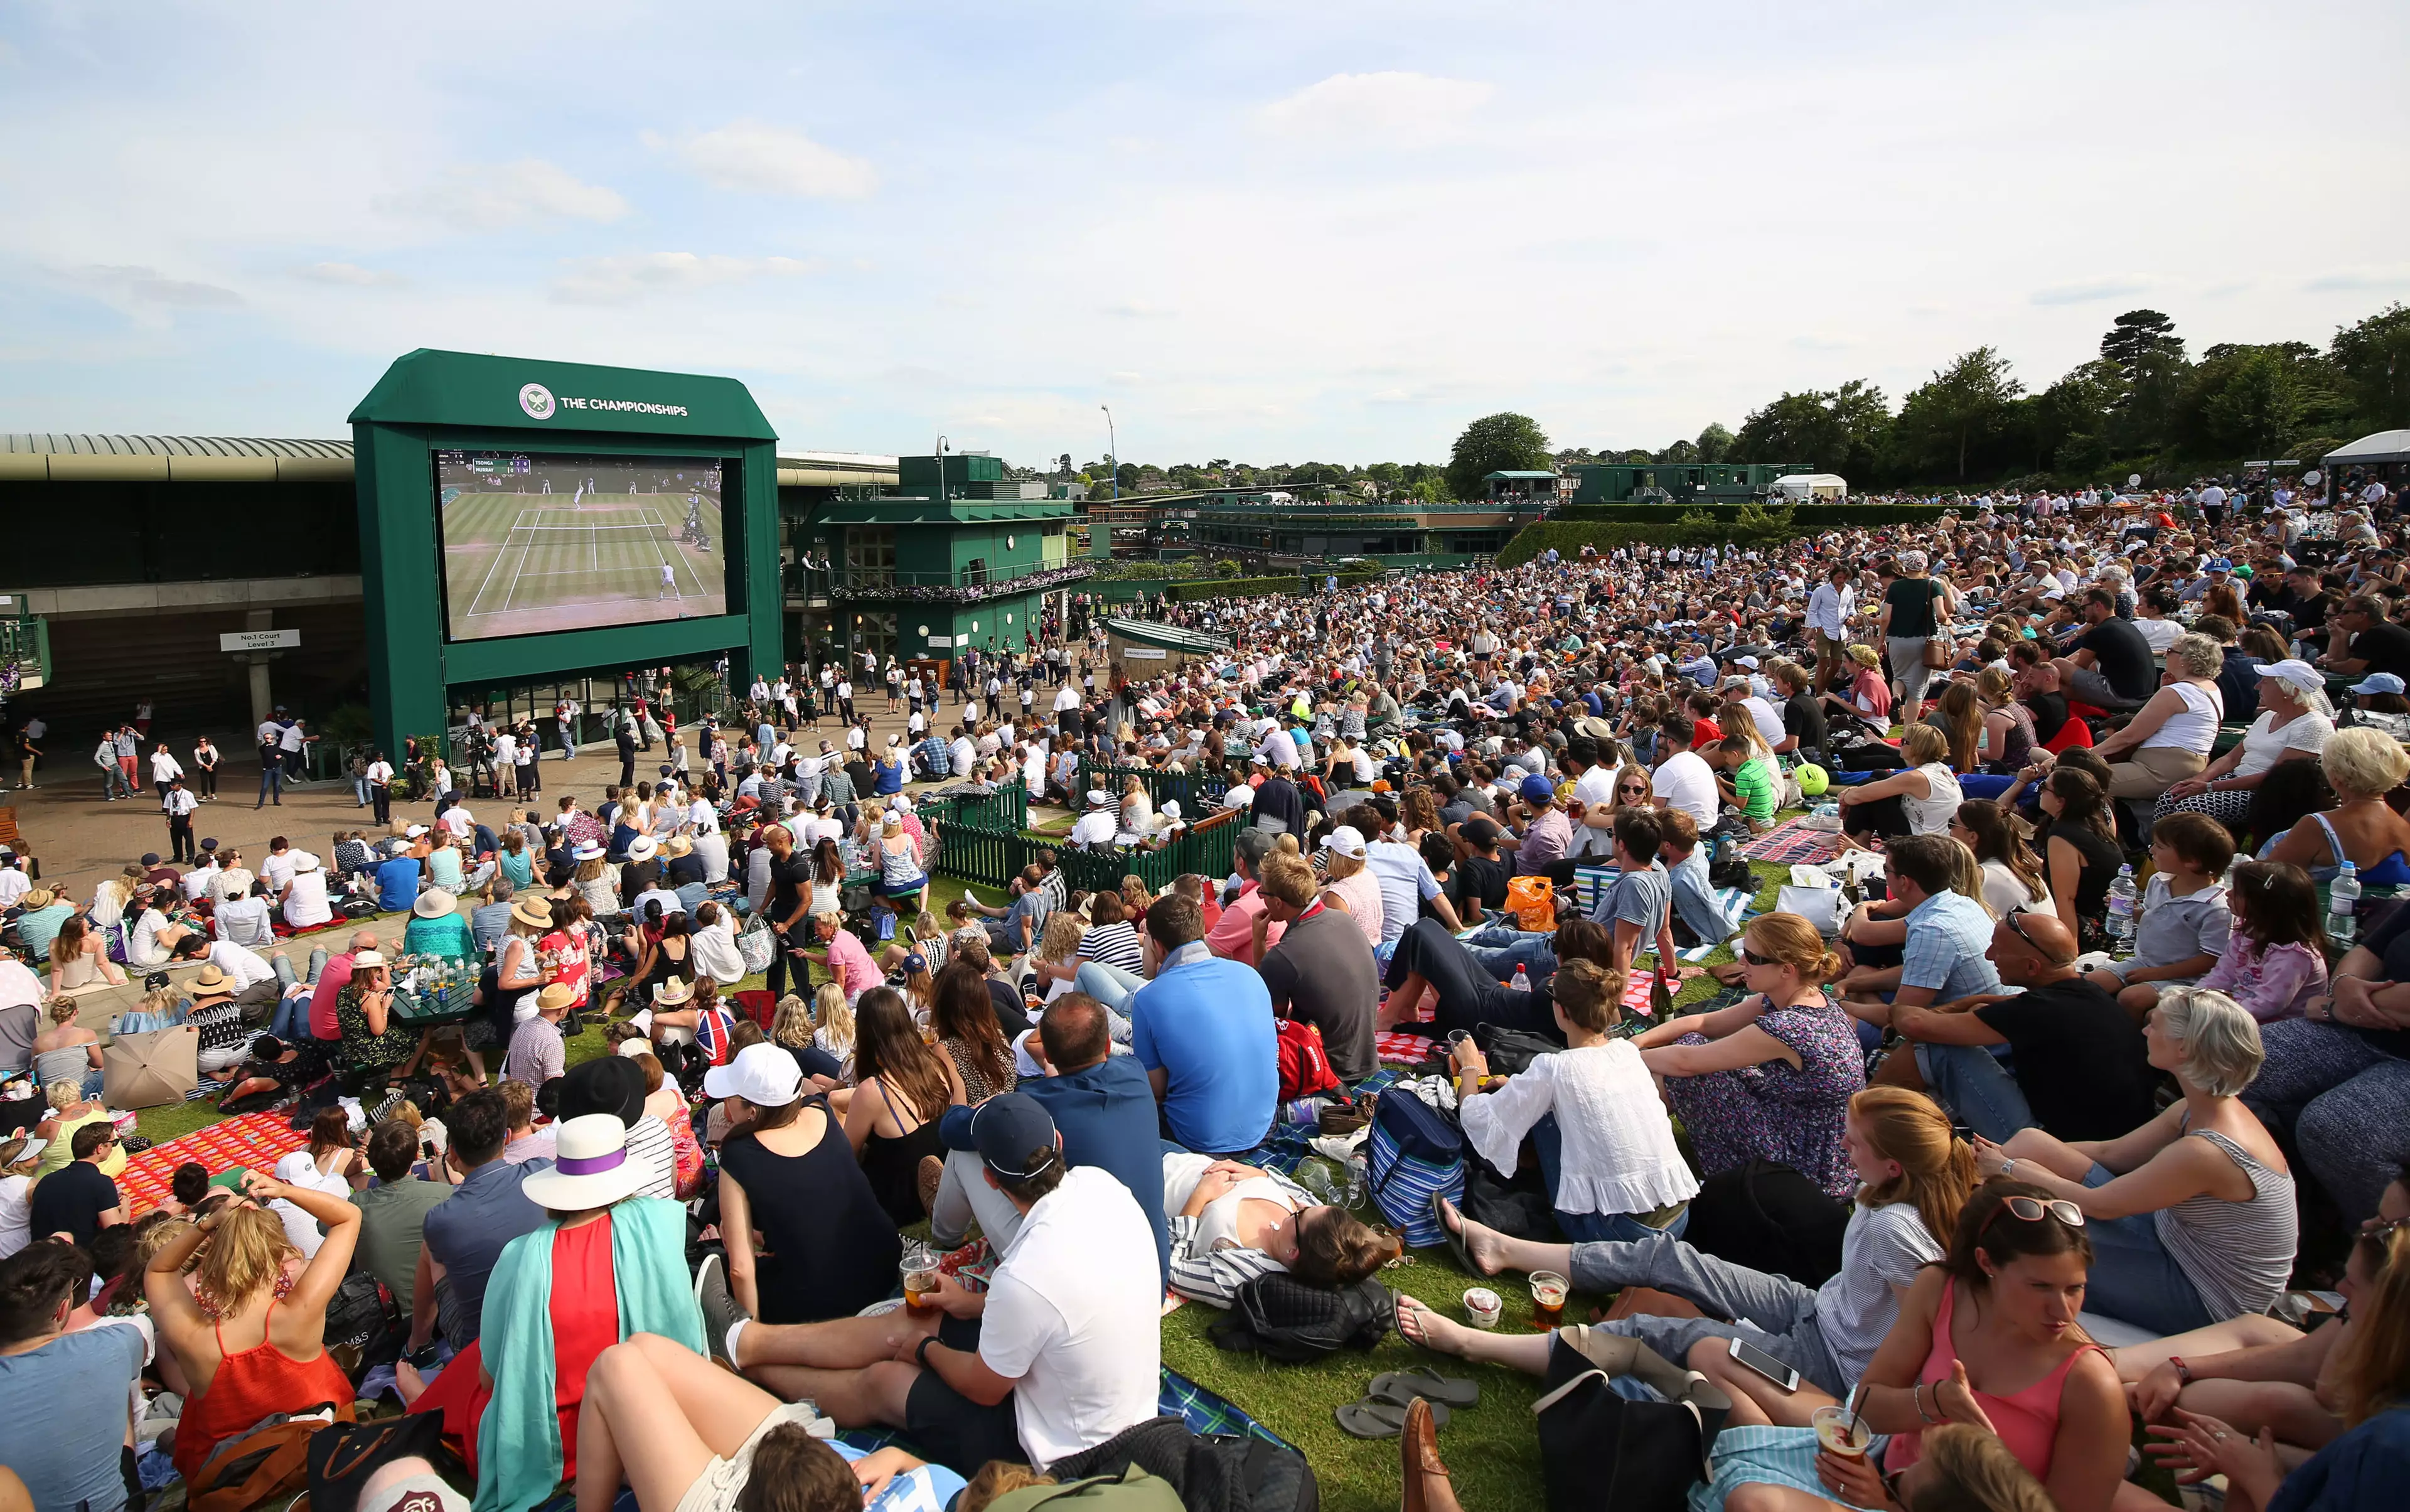 Crowds now often flock to Henman Hill to watch Murray. Image: PA Images